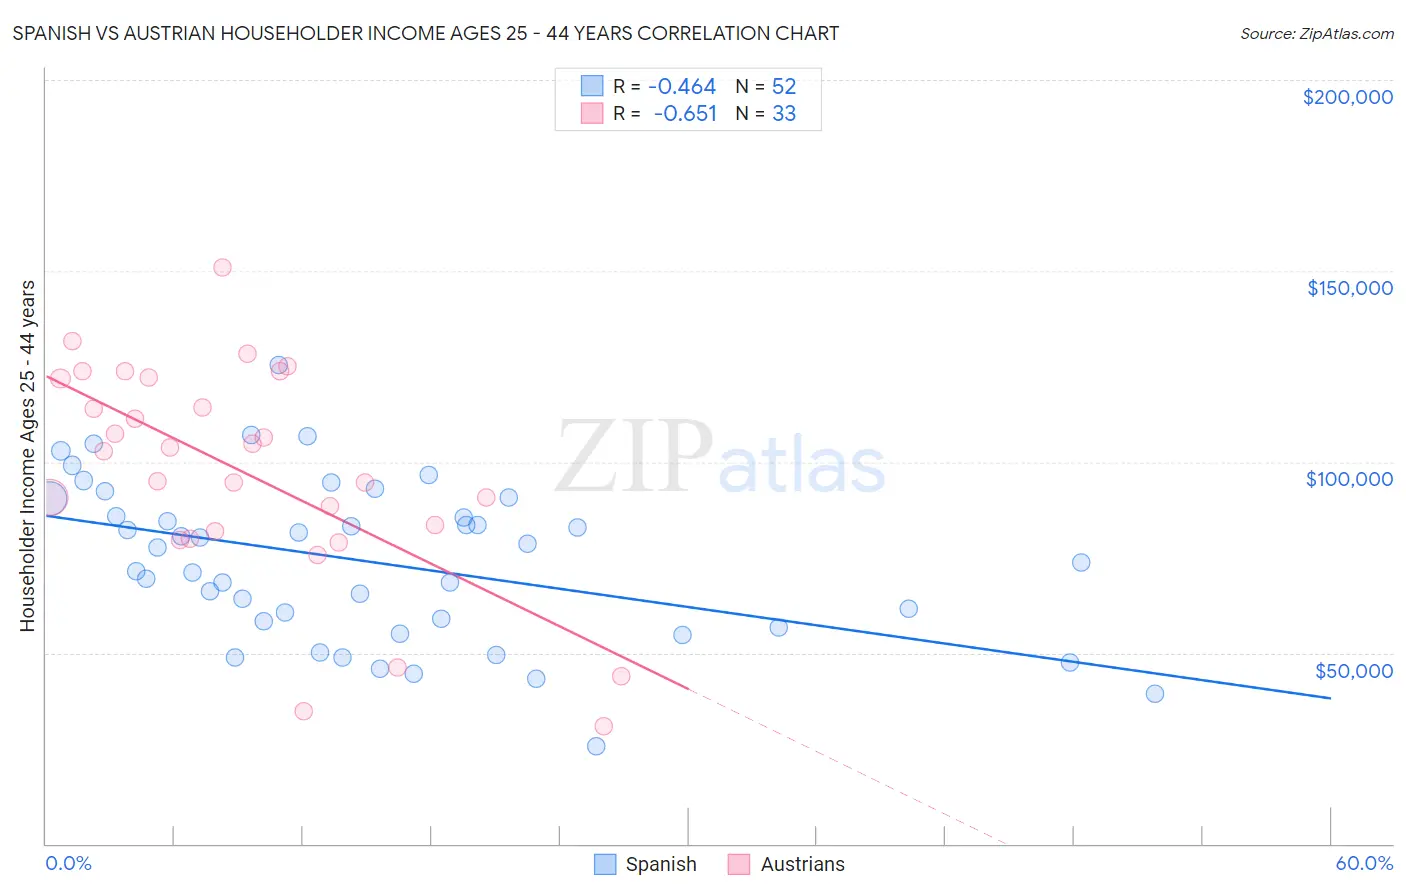 Spanish vs Austrian Householder Income Ages 25 - 44 years